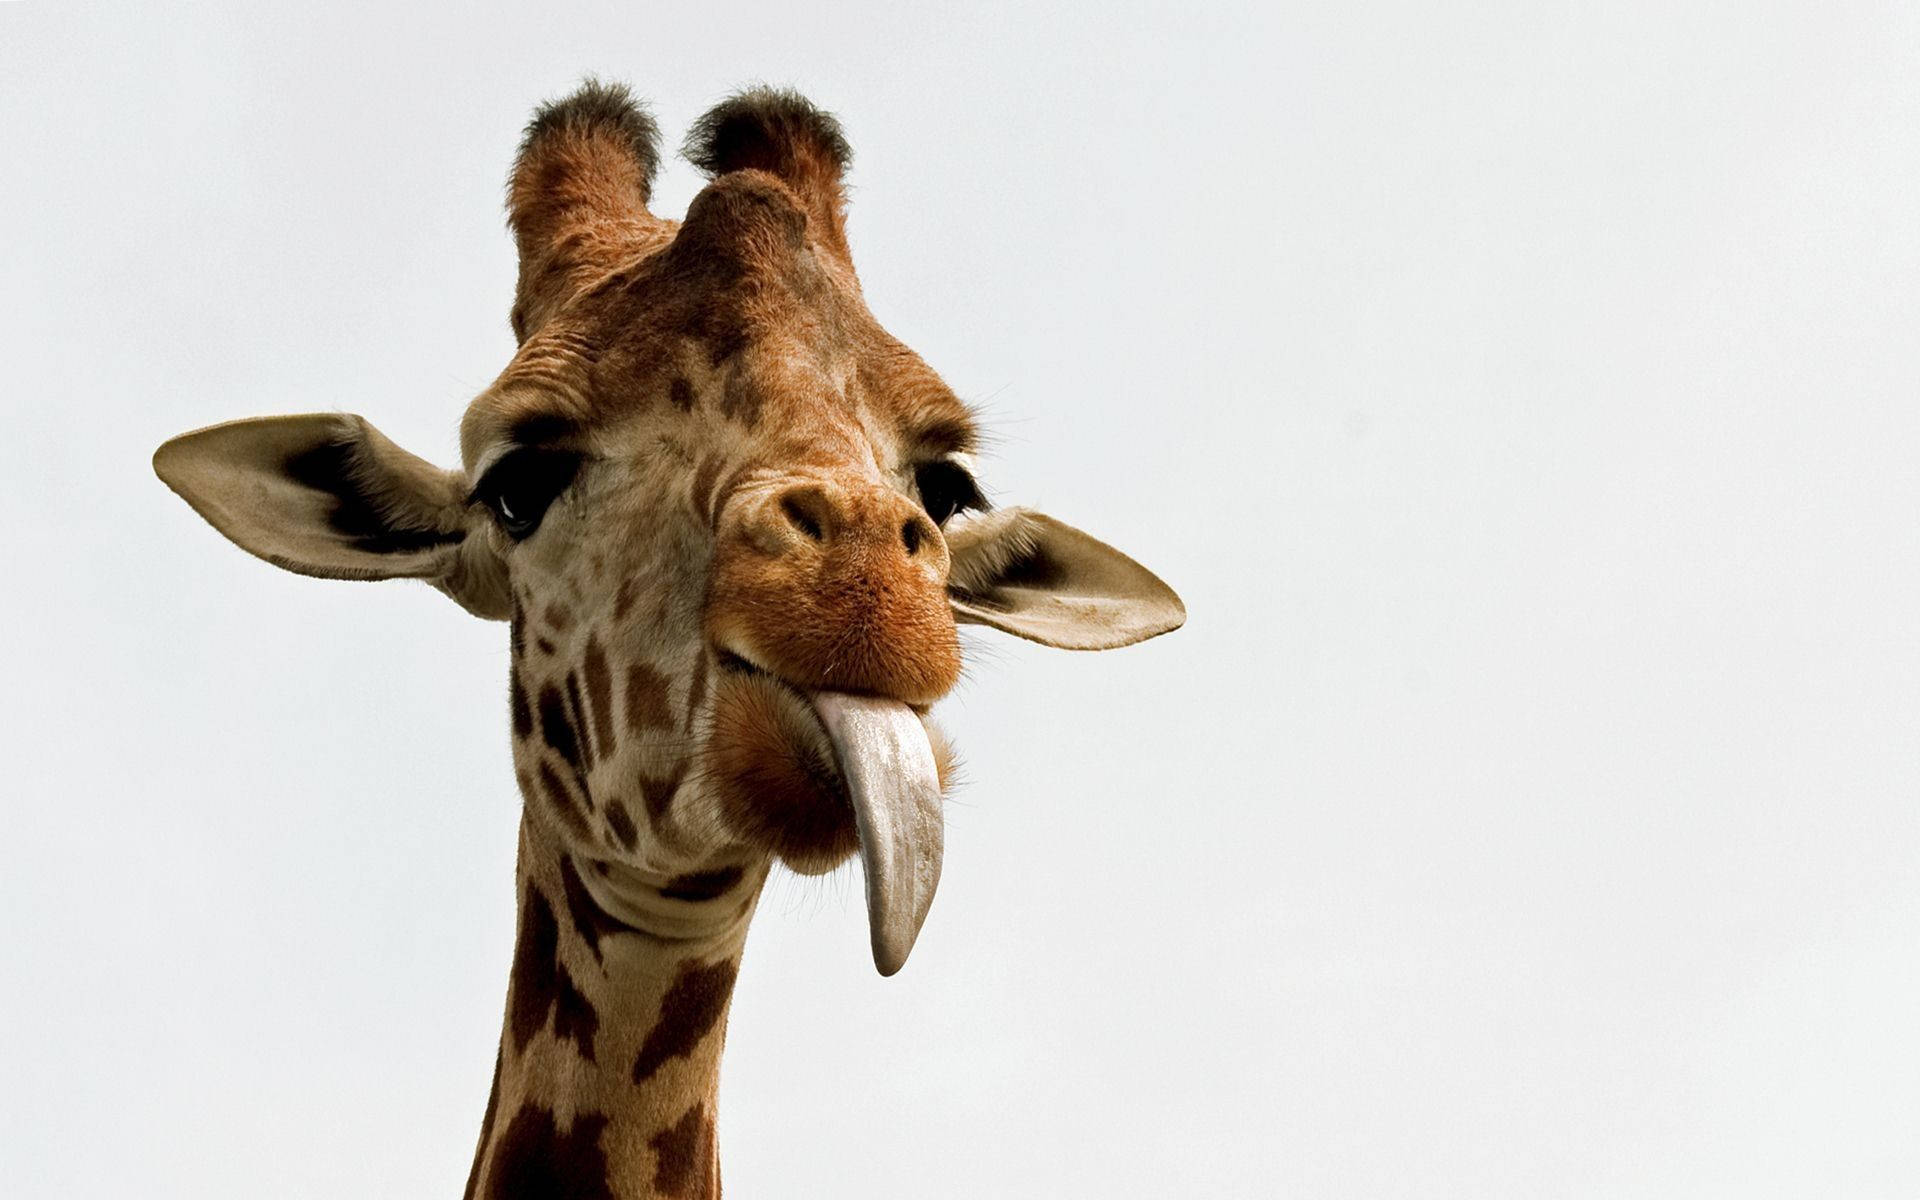 Baby Giraffe Tongue Out Background